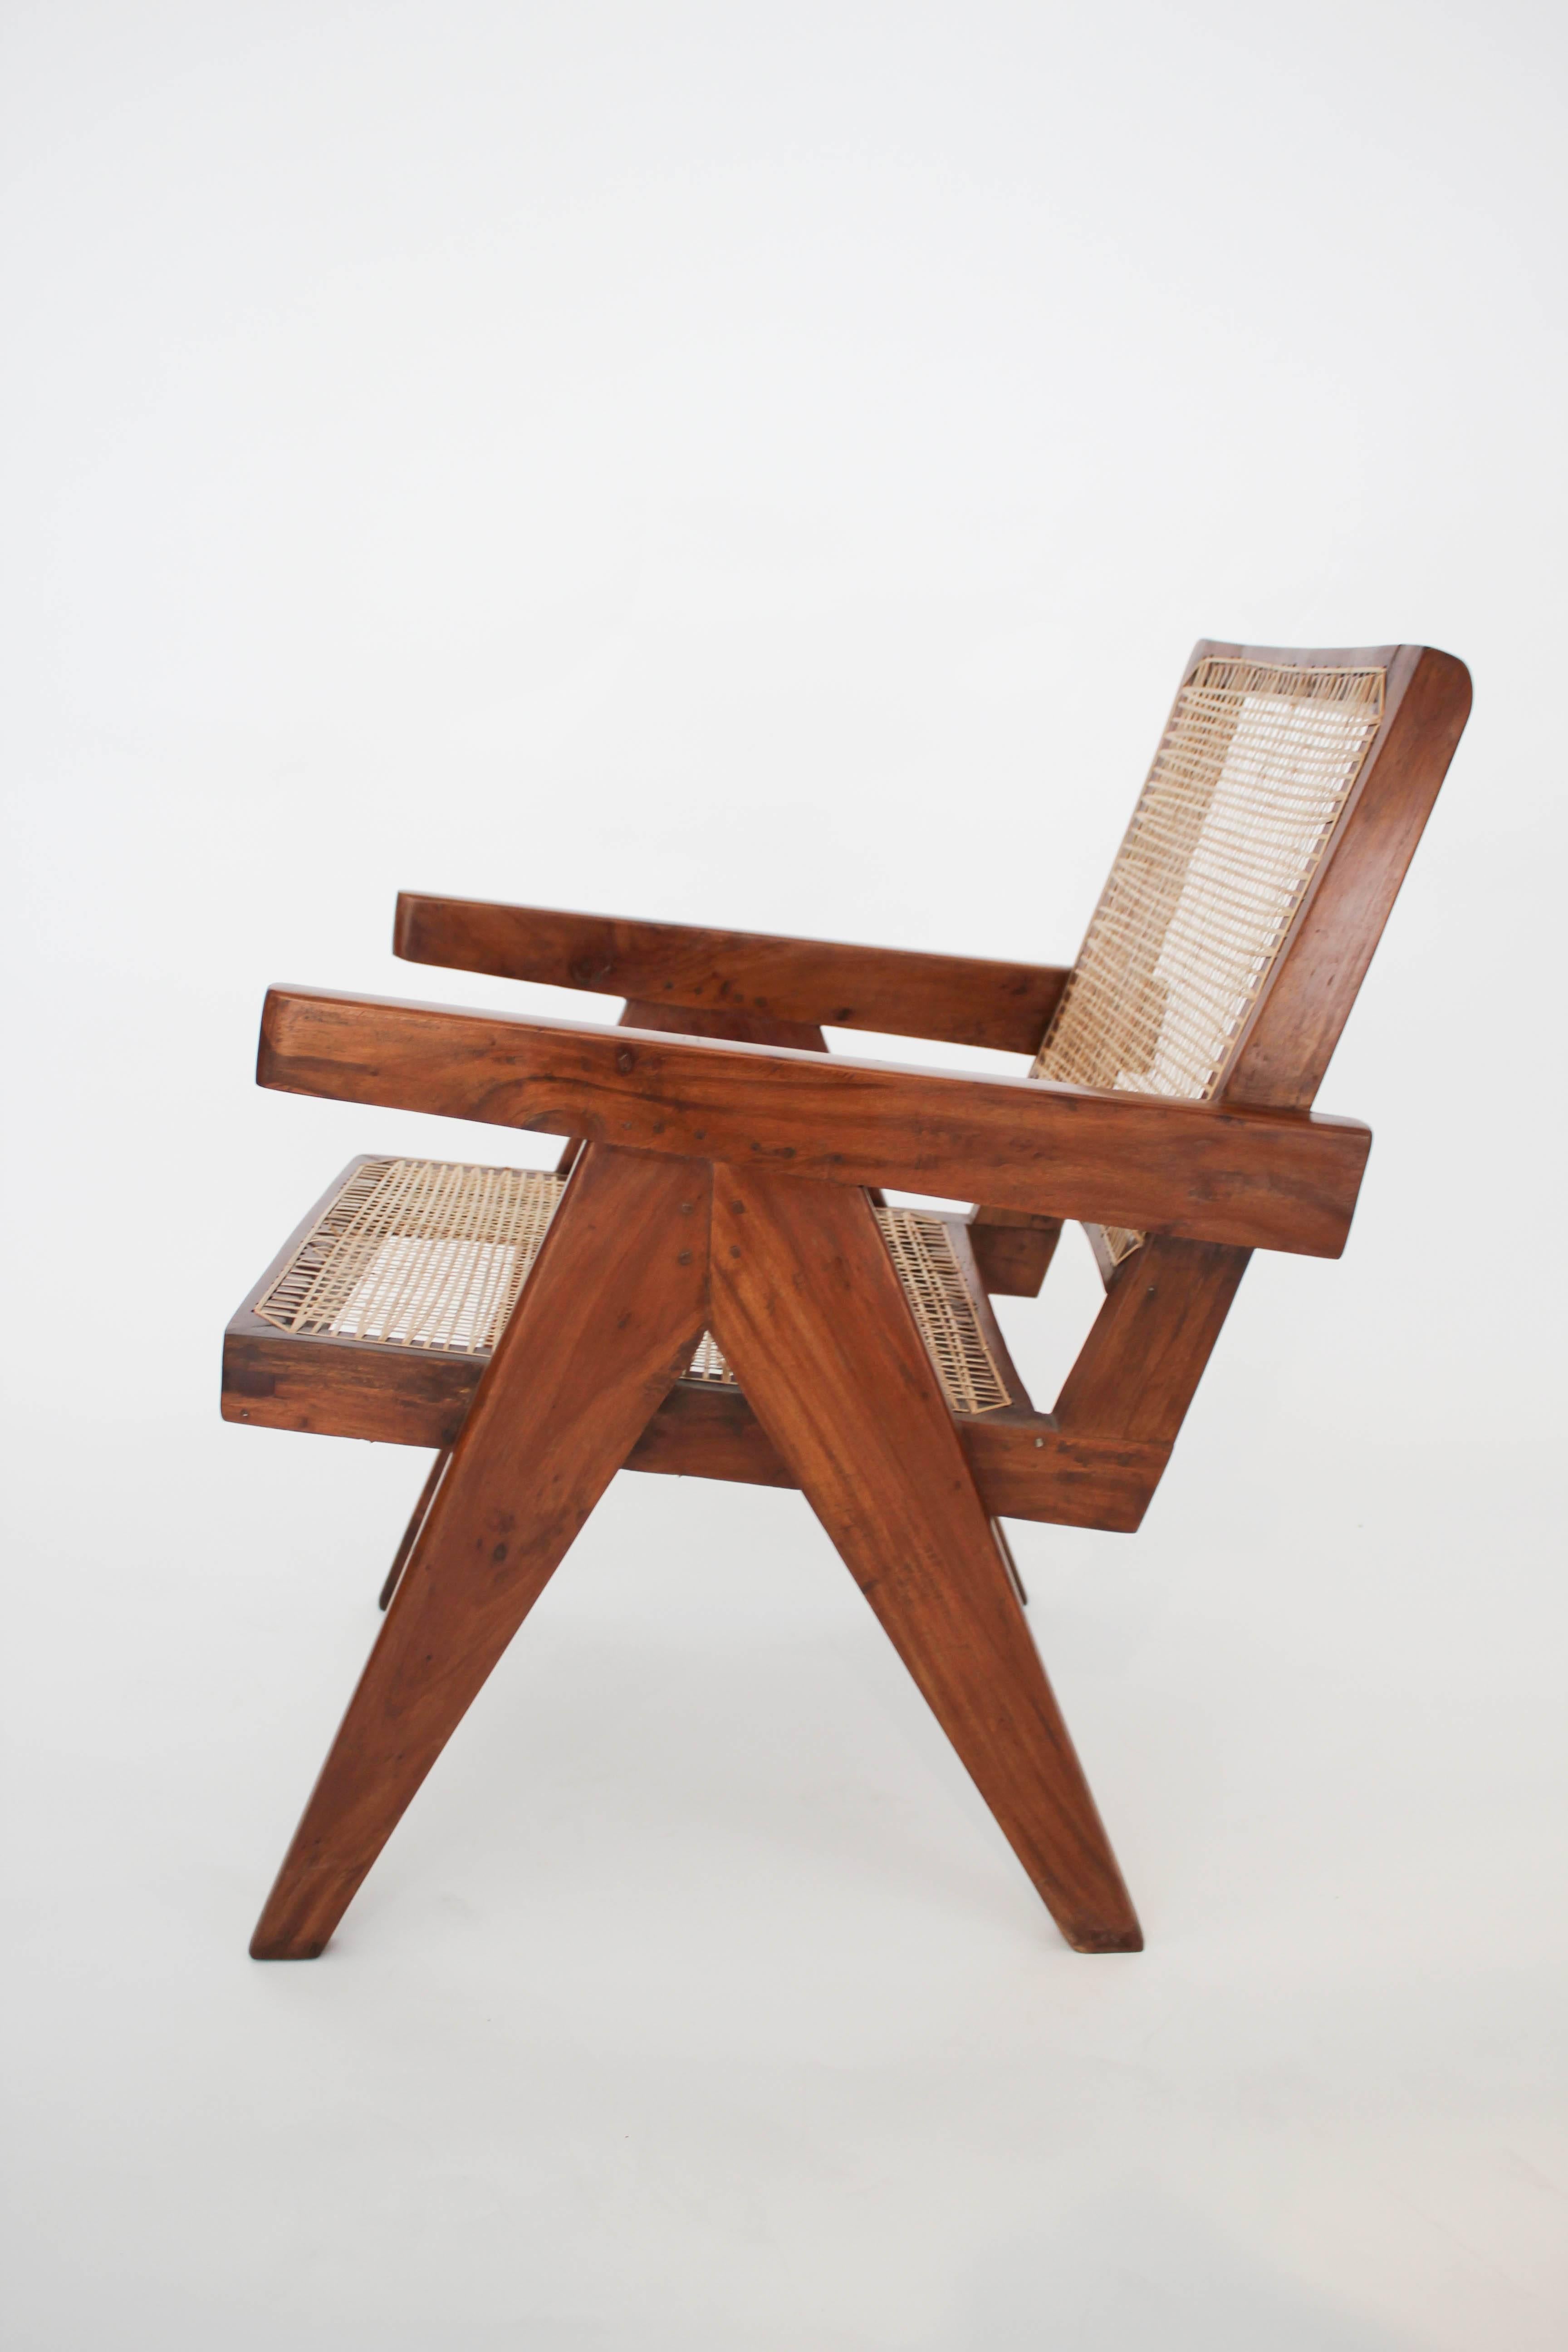 A pair of teak armchairs by Pierre Jeanneret for Chandigarh, circa 1950s. One of the chairs is a fraction longer than the other, a minor difference that does not affect the overall match. Measure: 70cm depth as opposed to 68cm depth of the second